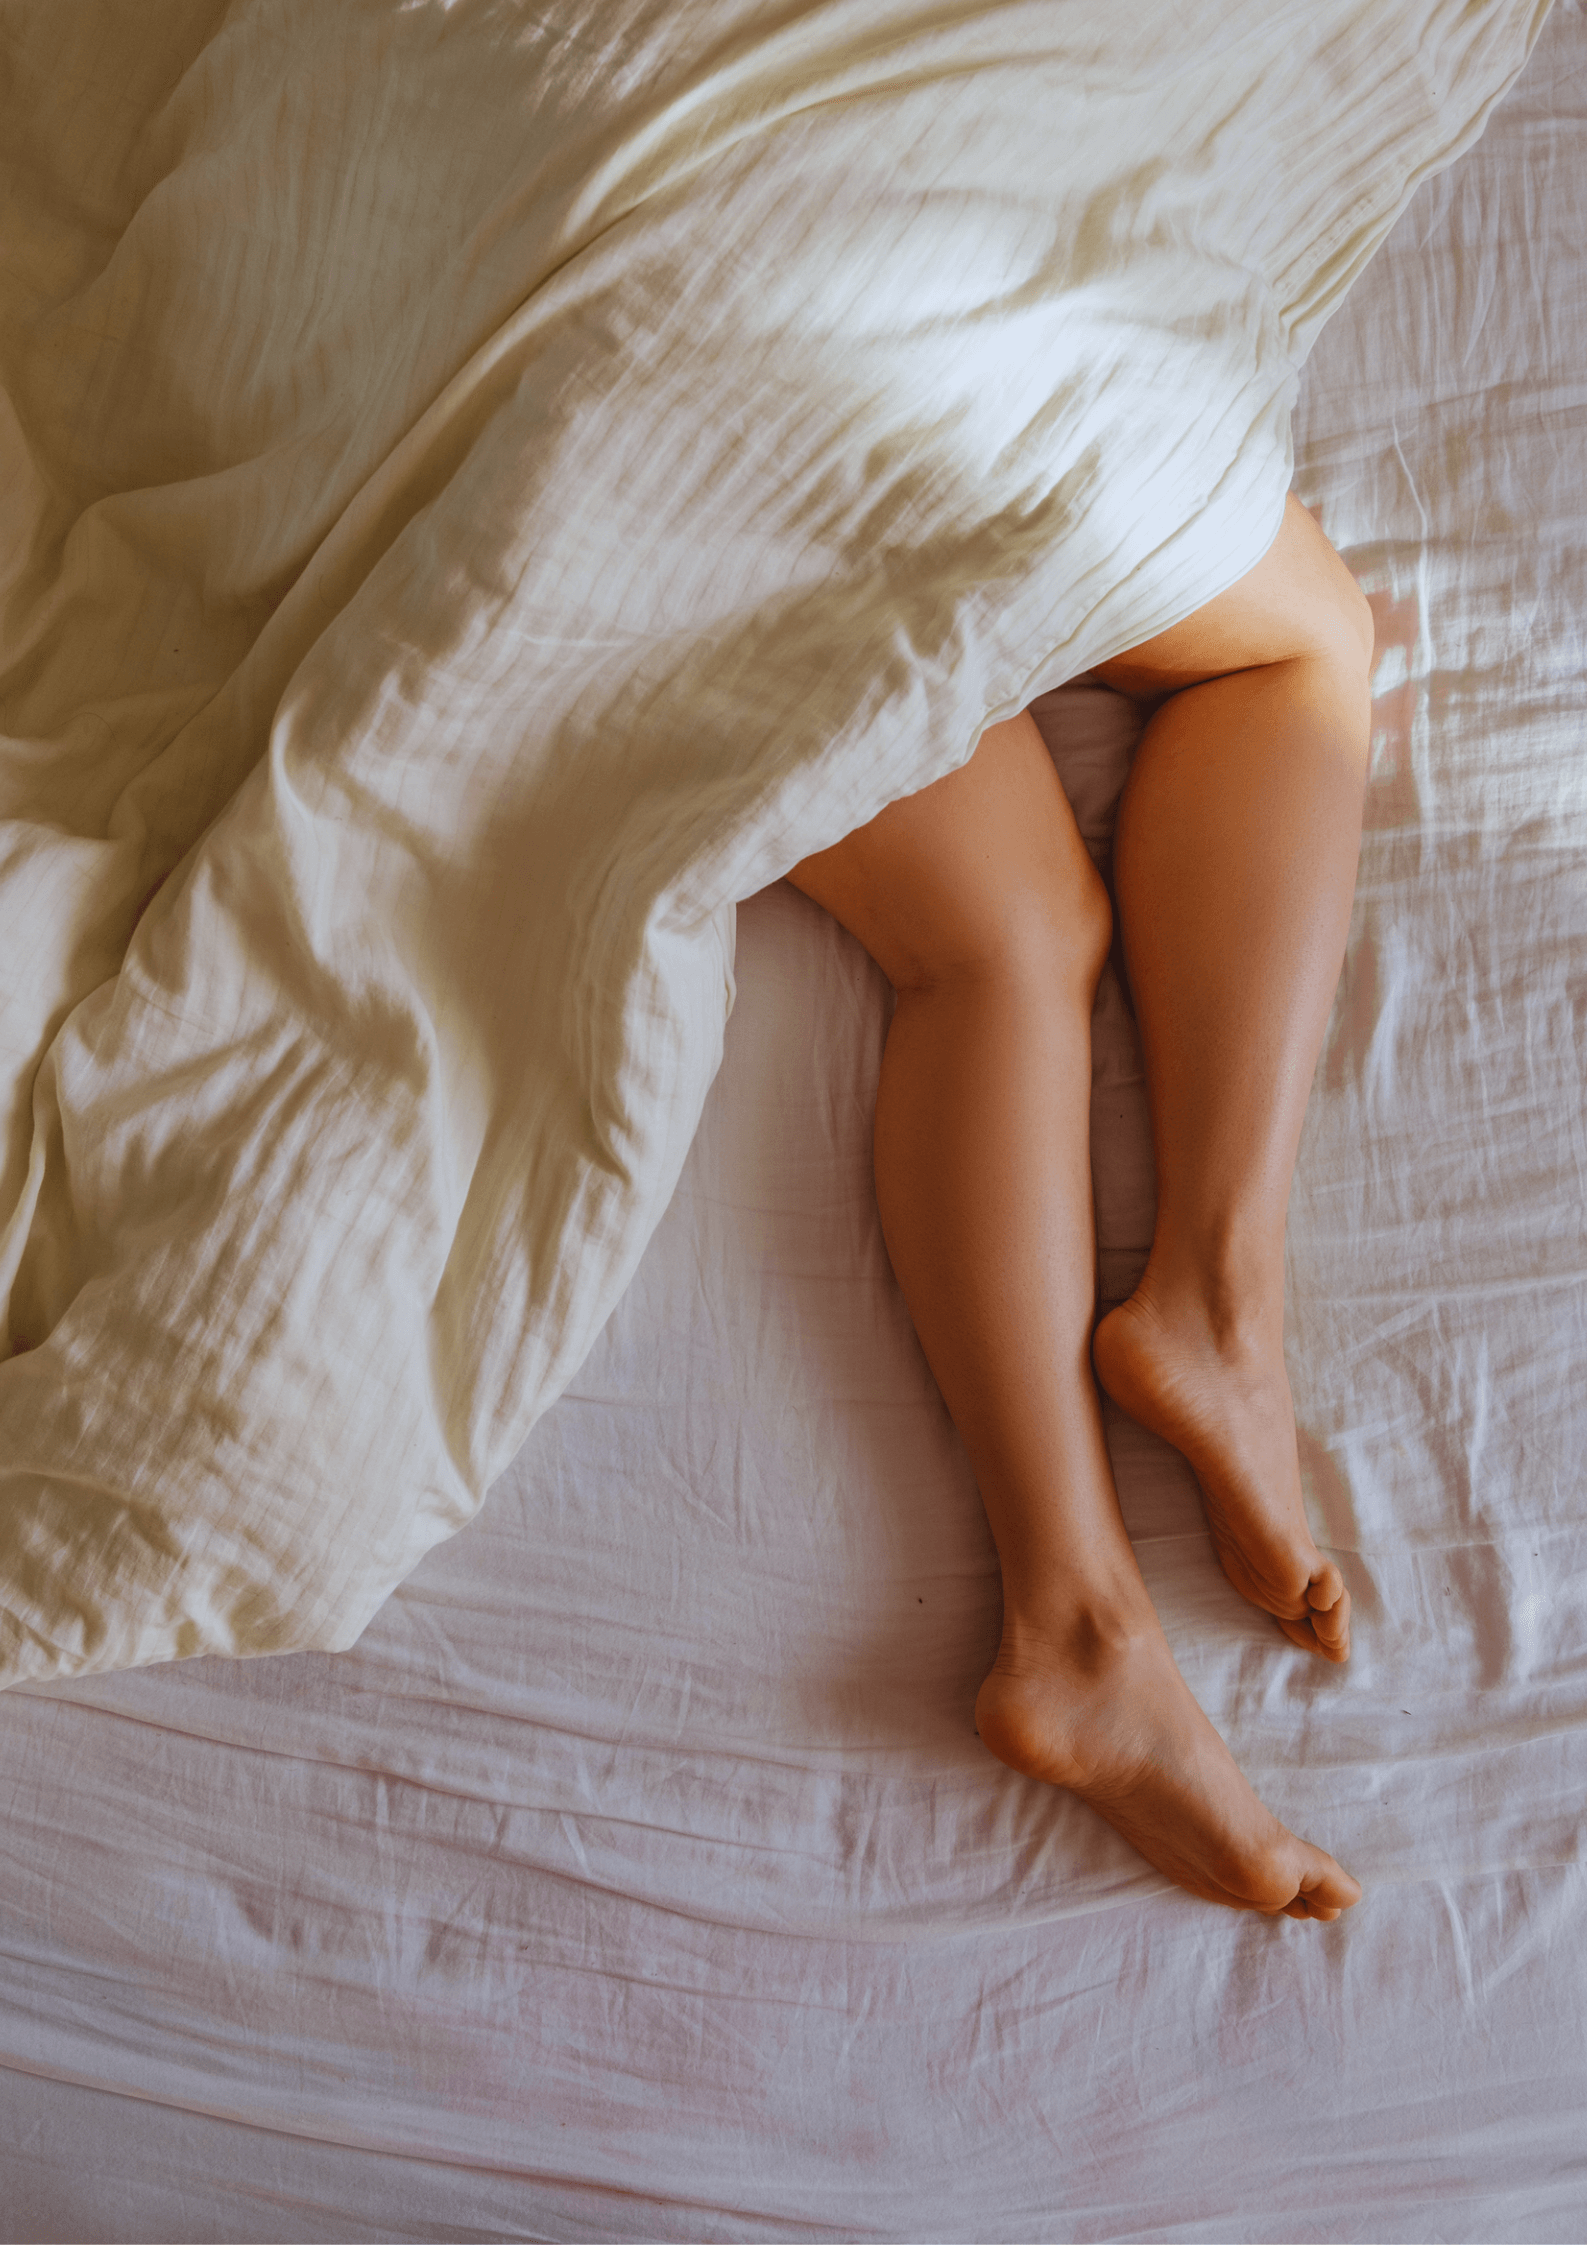 How to improve your sleep hygiene by our lean journey